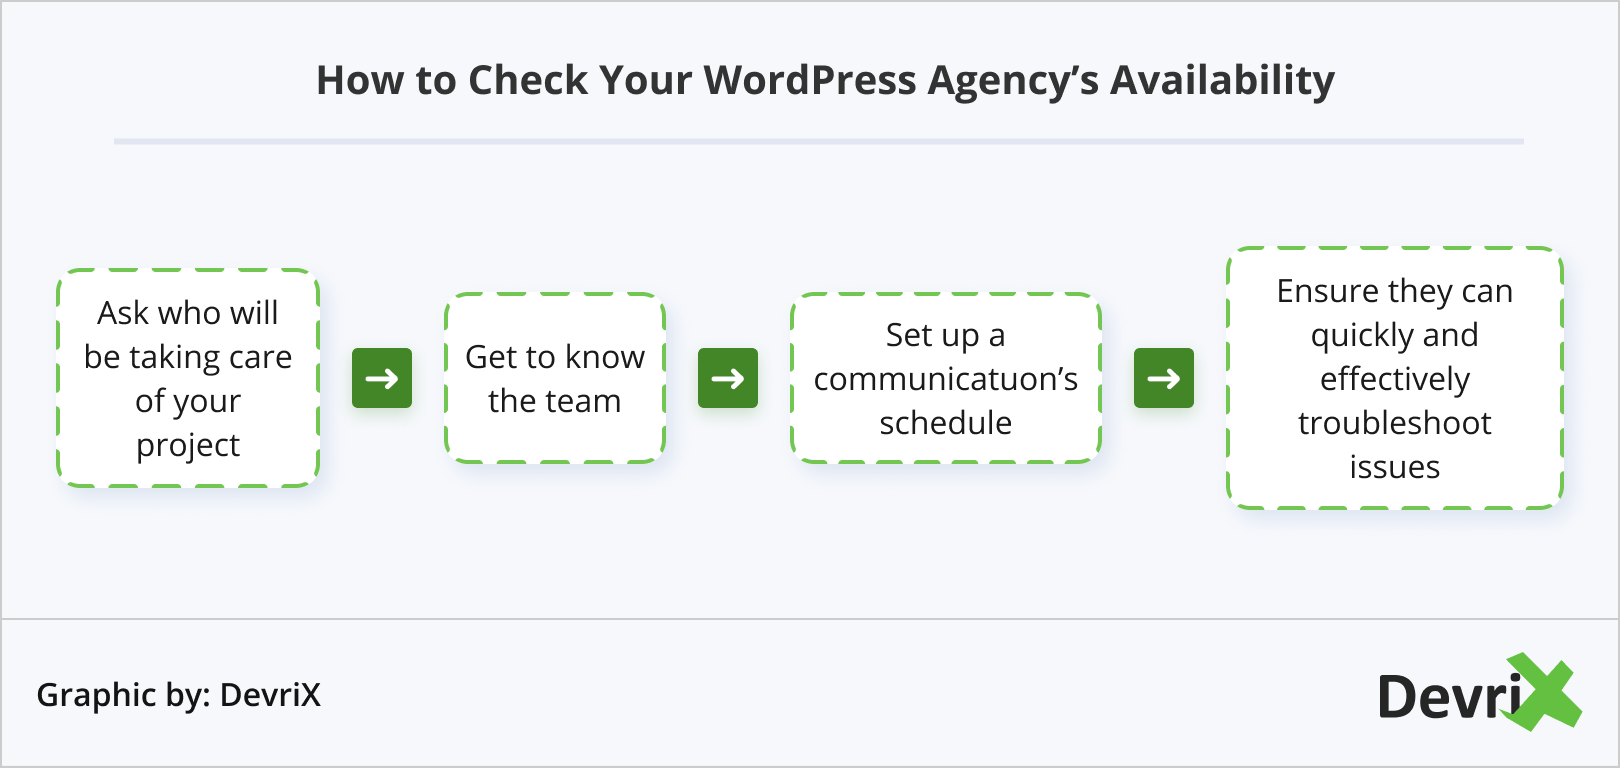 How to Check Your WordPress Agency’s Availability